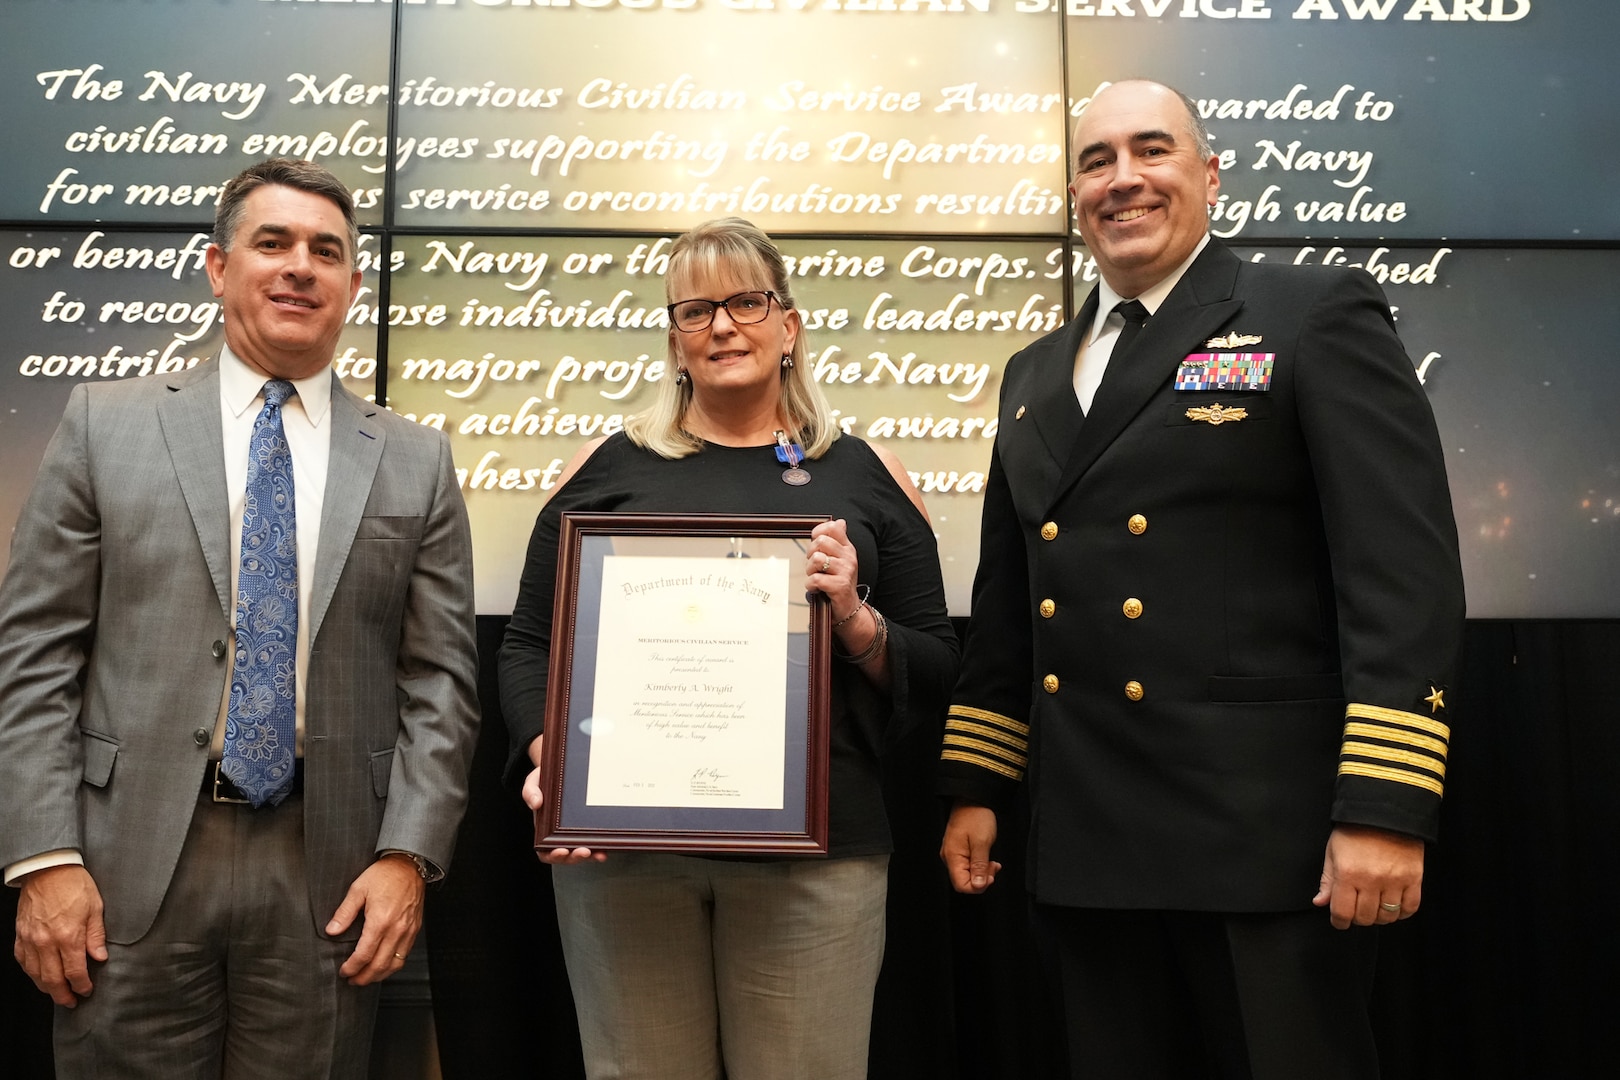 IMAGE: Kimberly Wright receives the Navy Meritorious Civilian Service Award at the 2021 Naval Surface Warfare Center Dahlgren Division (NSWCDD) Honorary Awards ceremony, June 17. Standing left to right: NSWCDD Technical Director, Dale Sisson, SES, Wright and NSWCDD Commanding Officer, Capt. Philip Mlynarski.